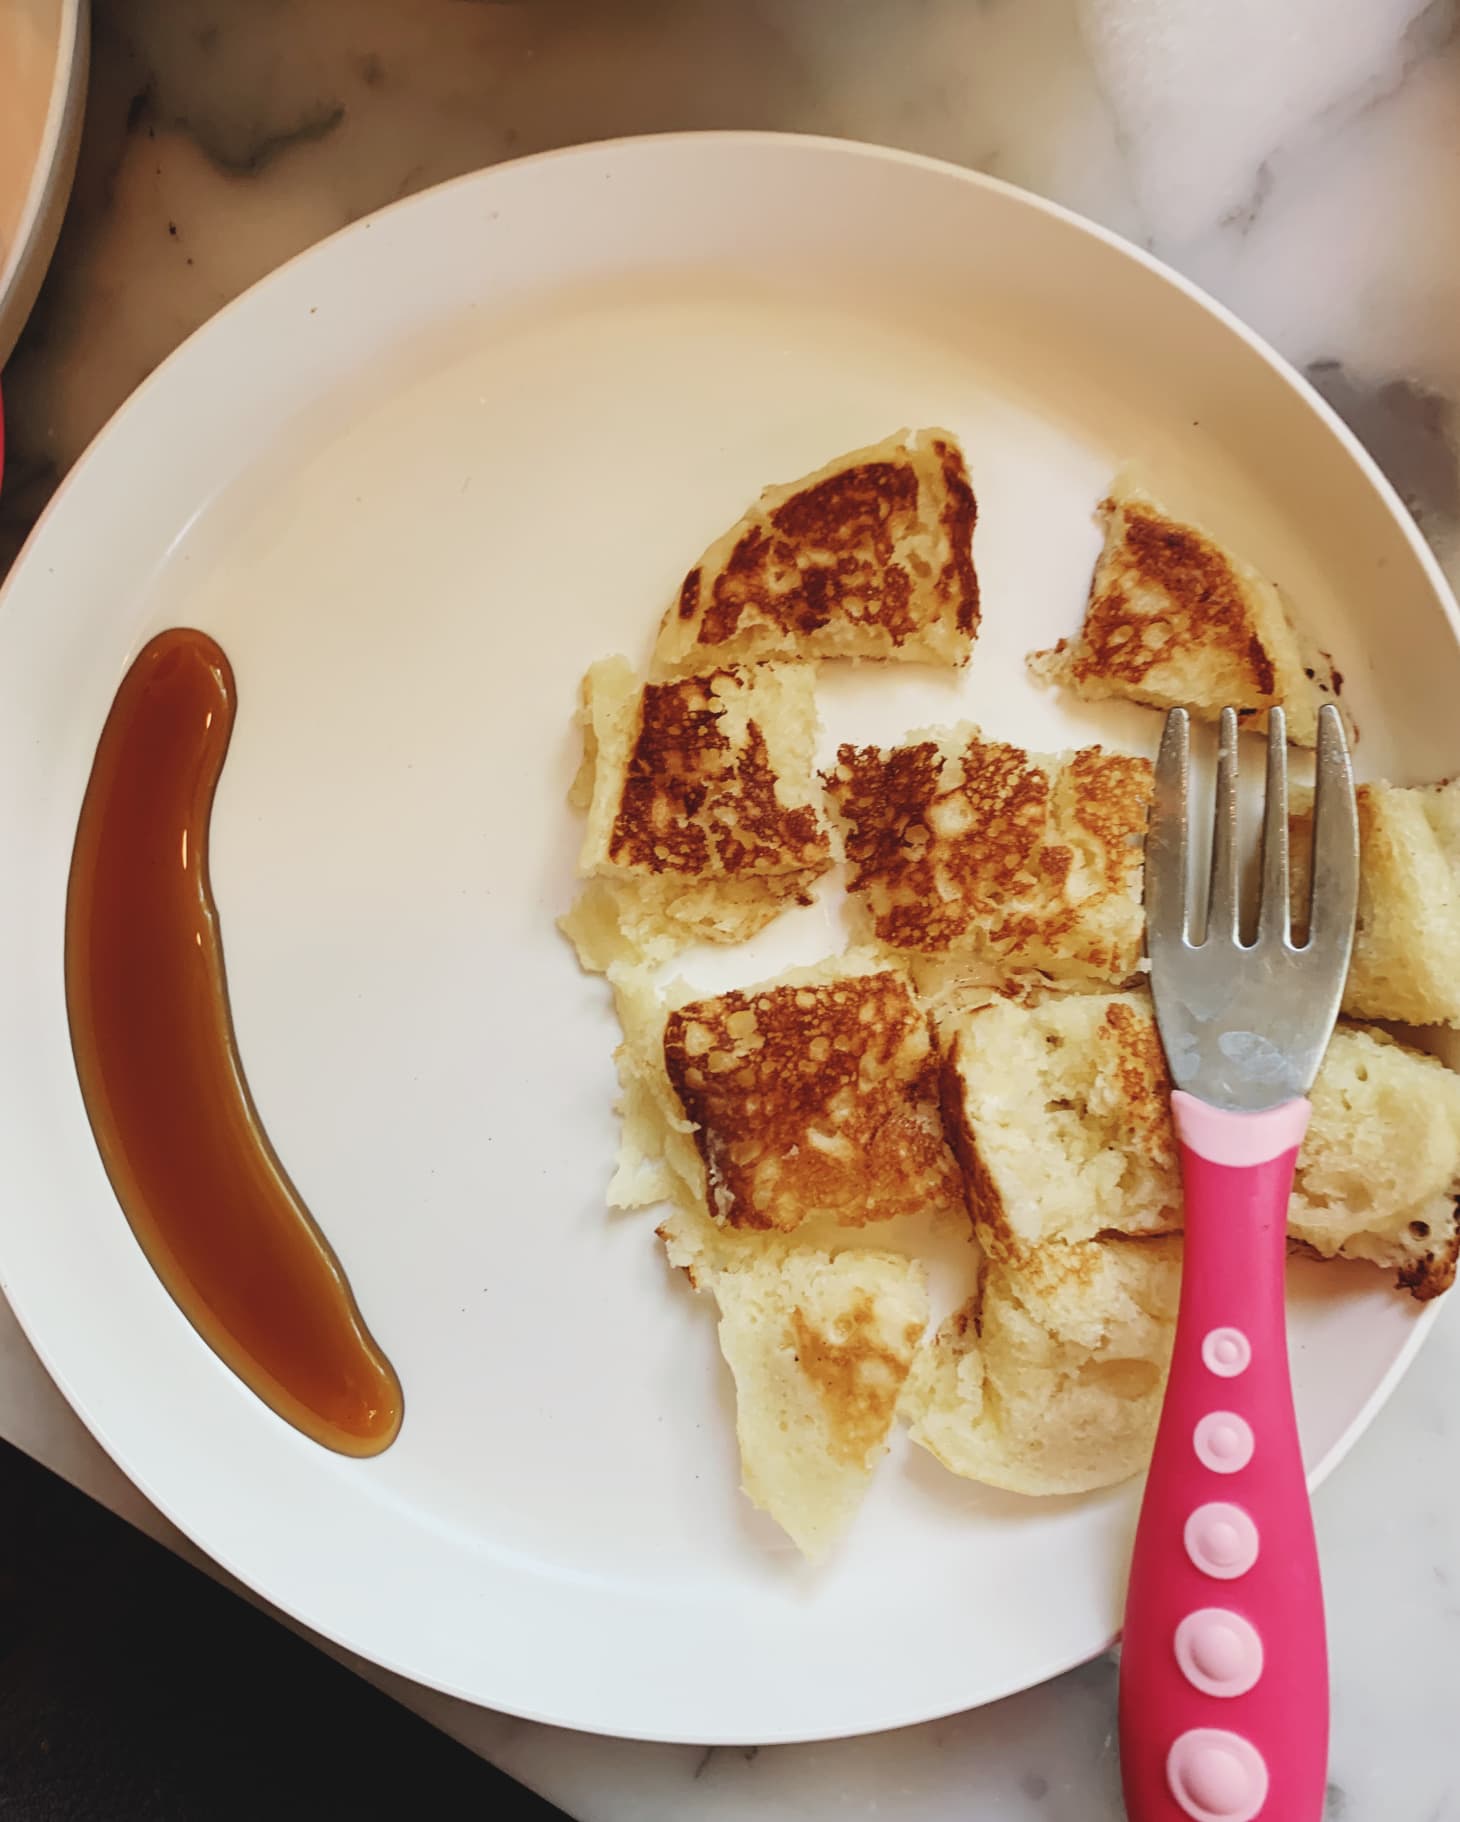 The Very Best Pancake Recipe I've Made for Years | Kitchn